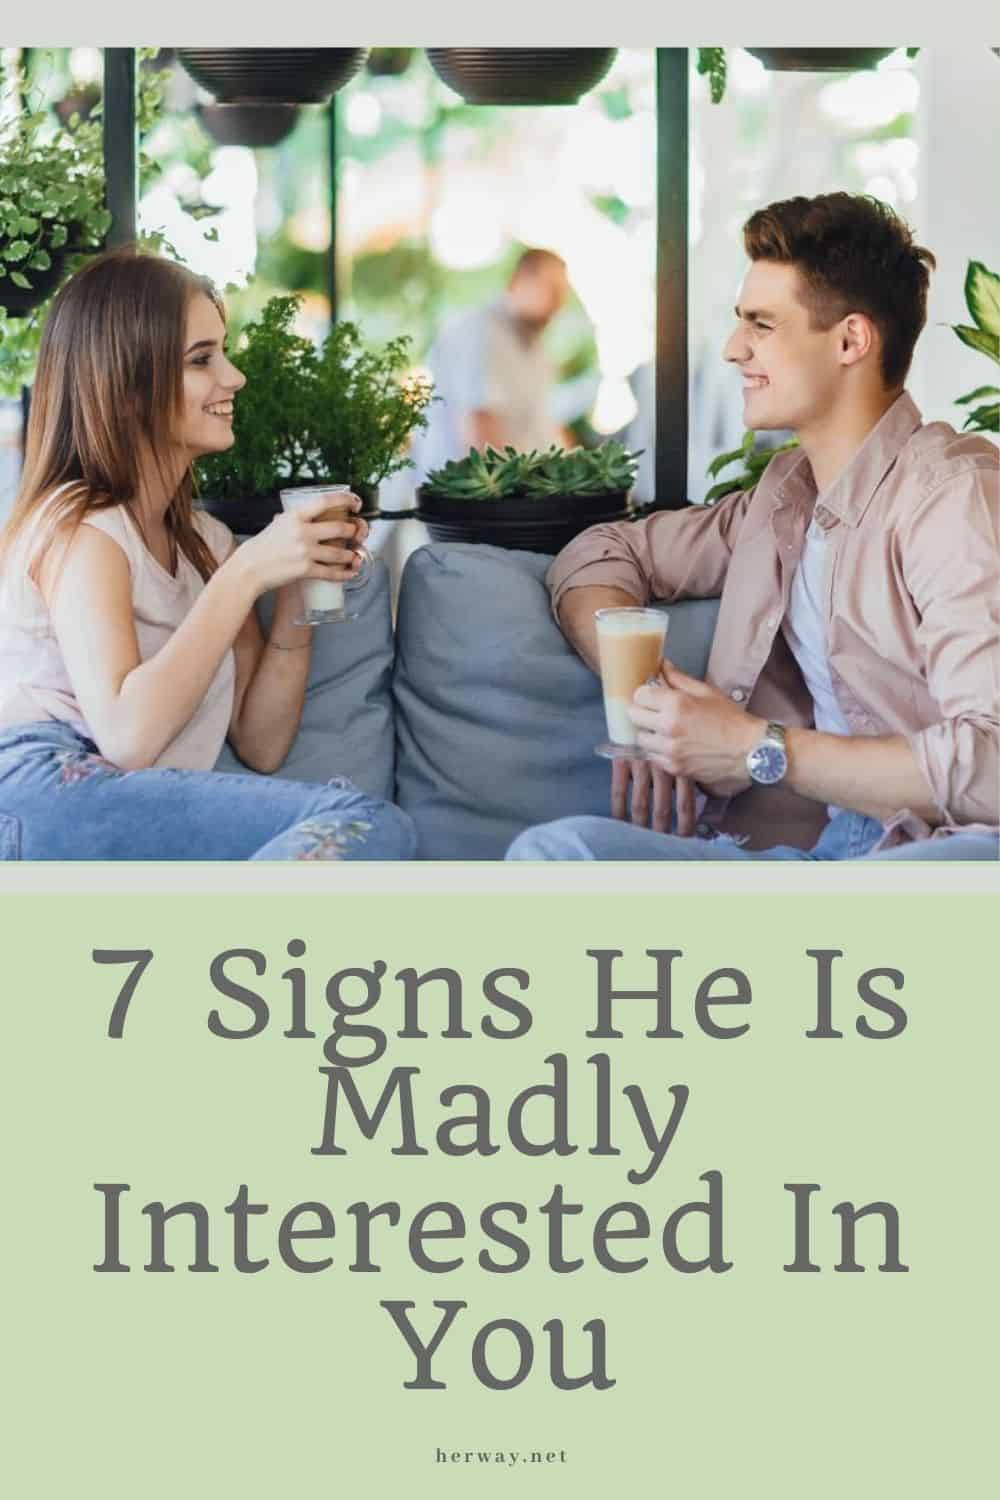 7 Signs He Is Madly Interested In You